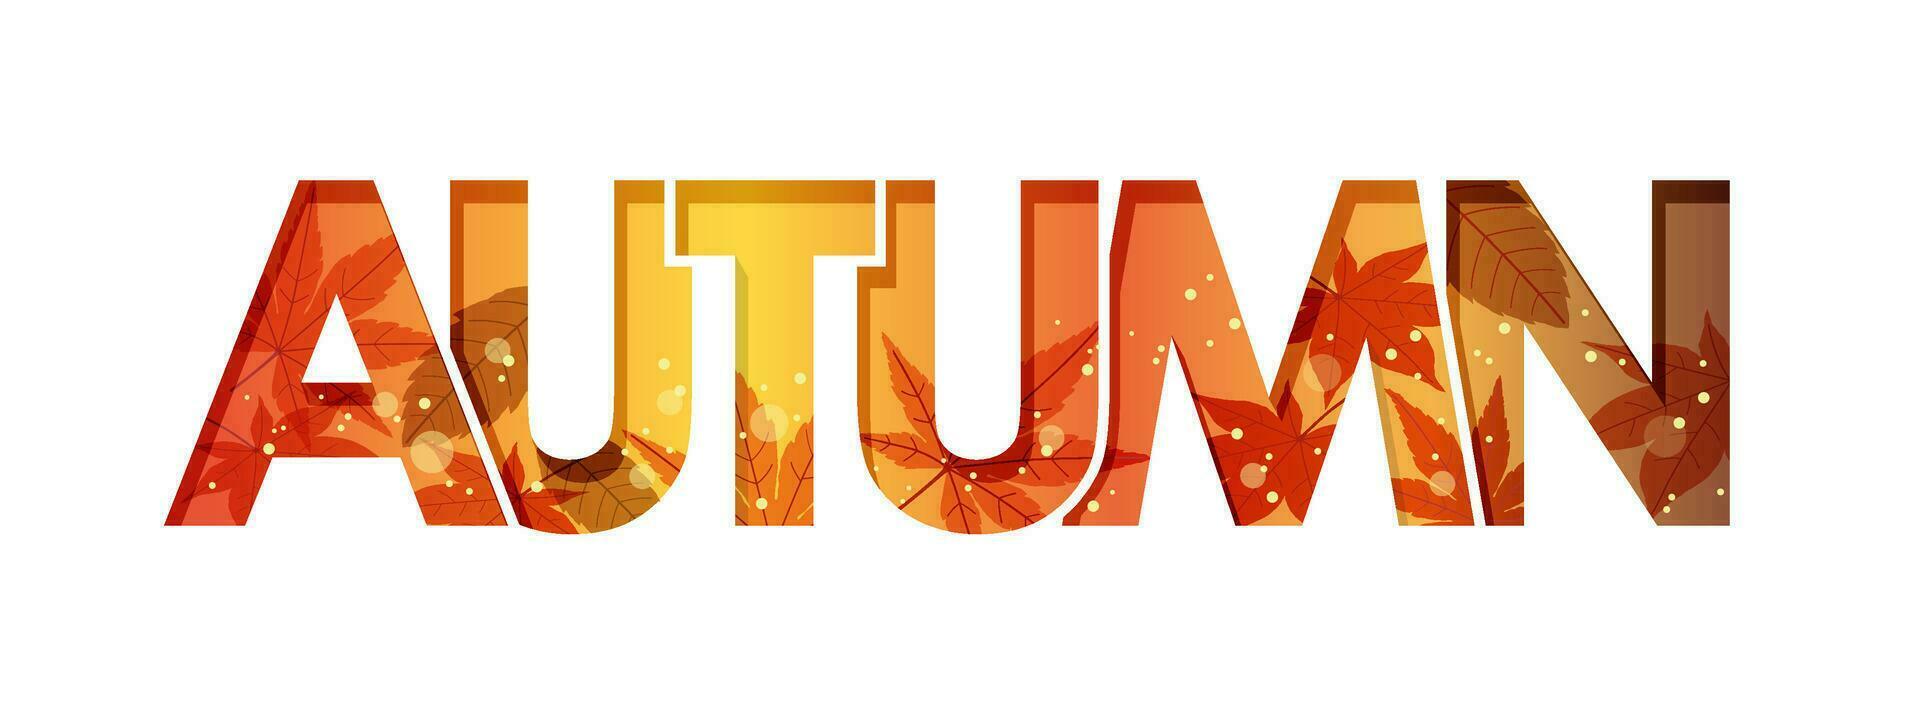 Decorative 3D Relief Autumn Logo. Vector Illustration Isolated On A White Background.